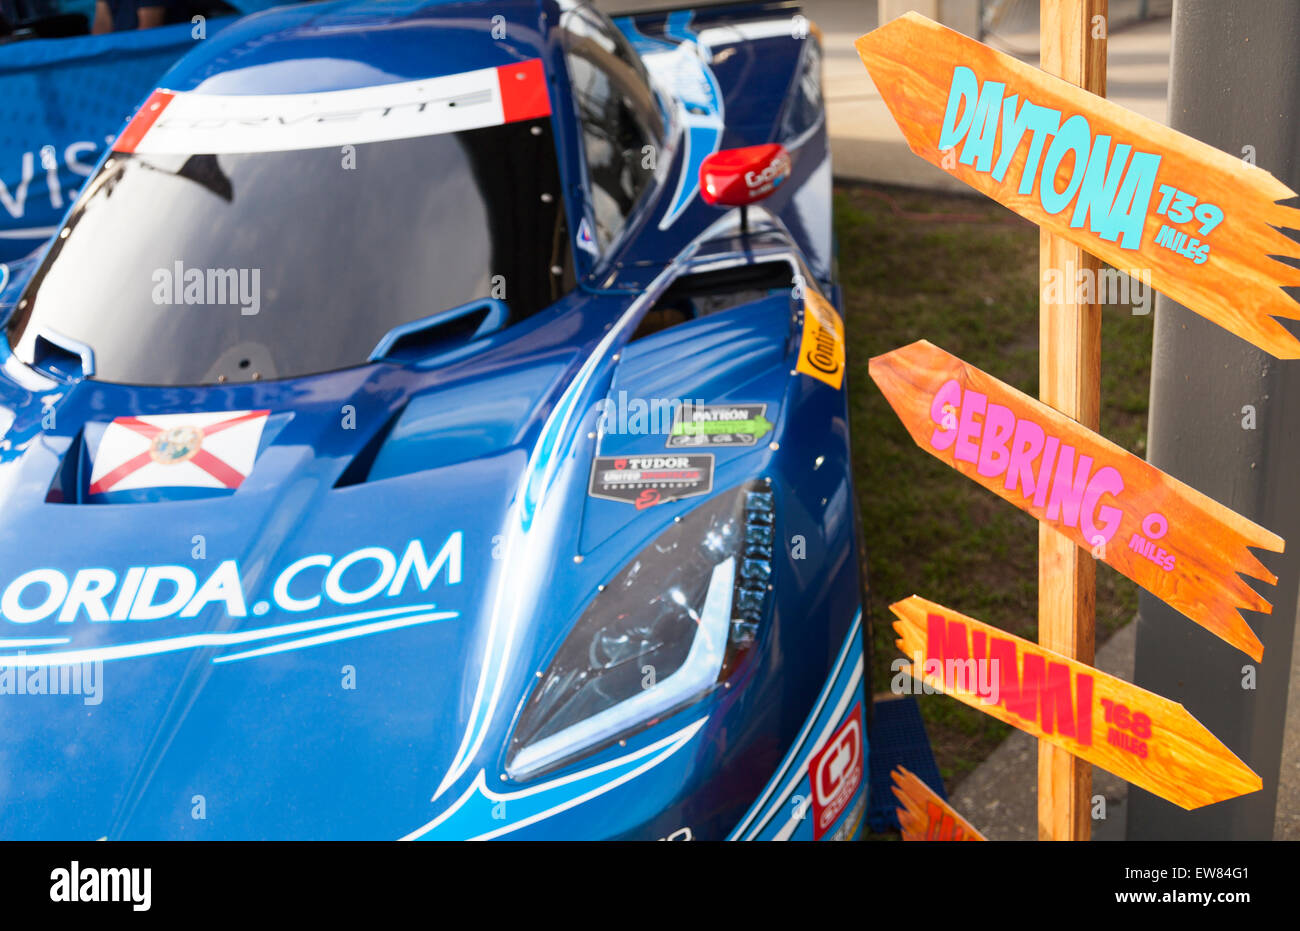 Visit Florida race car and destination signs at the 12 Hours of Sebring Car race in Sebring Florida Stock Photo